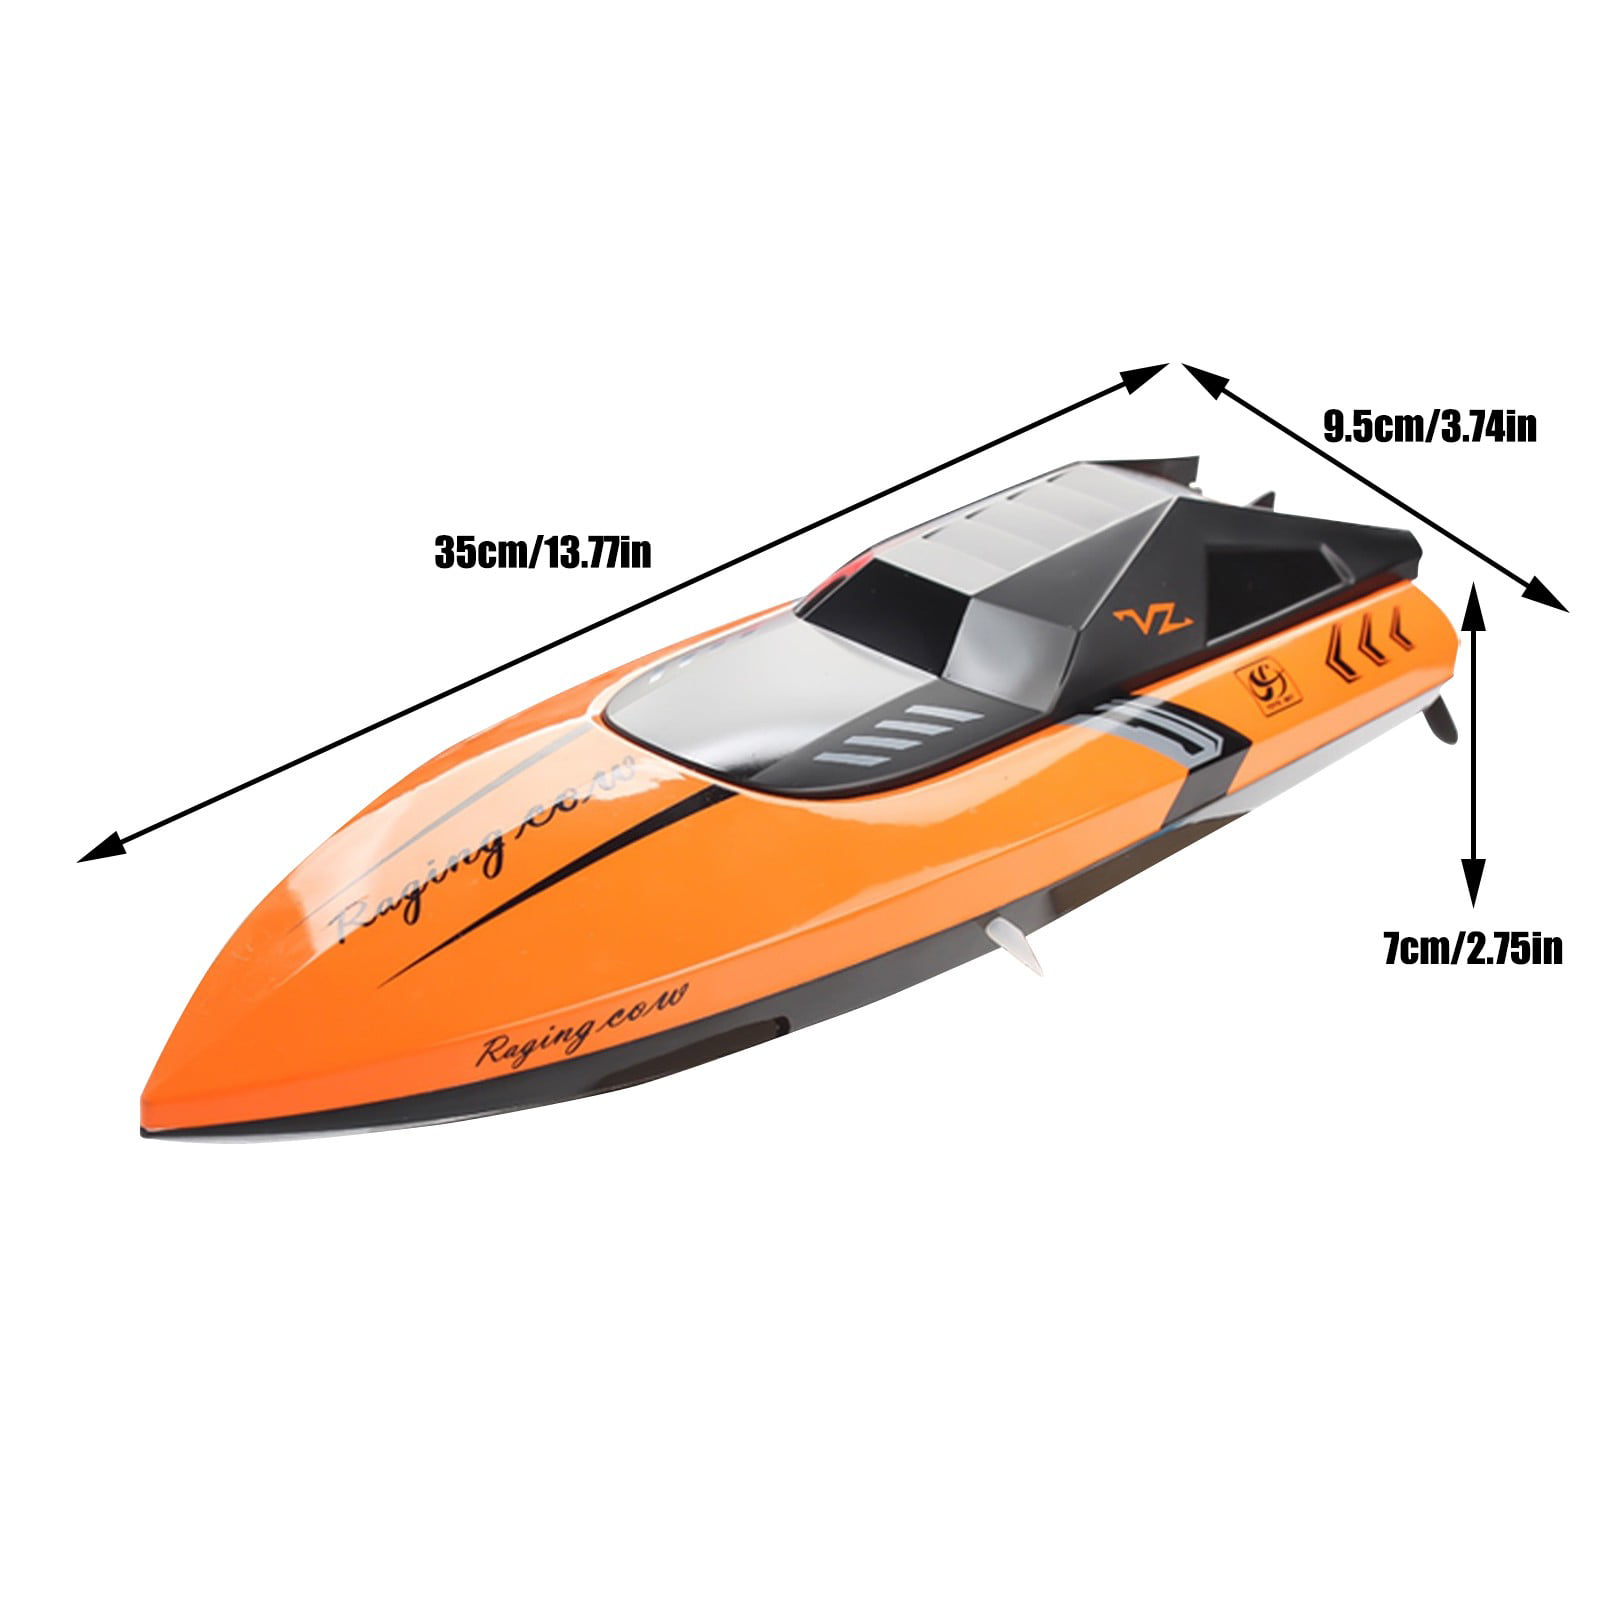 NEW BOXED HQ Radio Remote Control Racing Speed Boat RC Boat Fast Speed 12km/h 